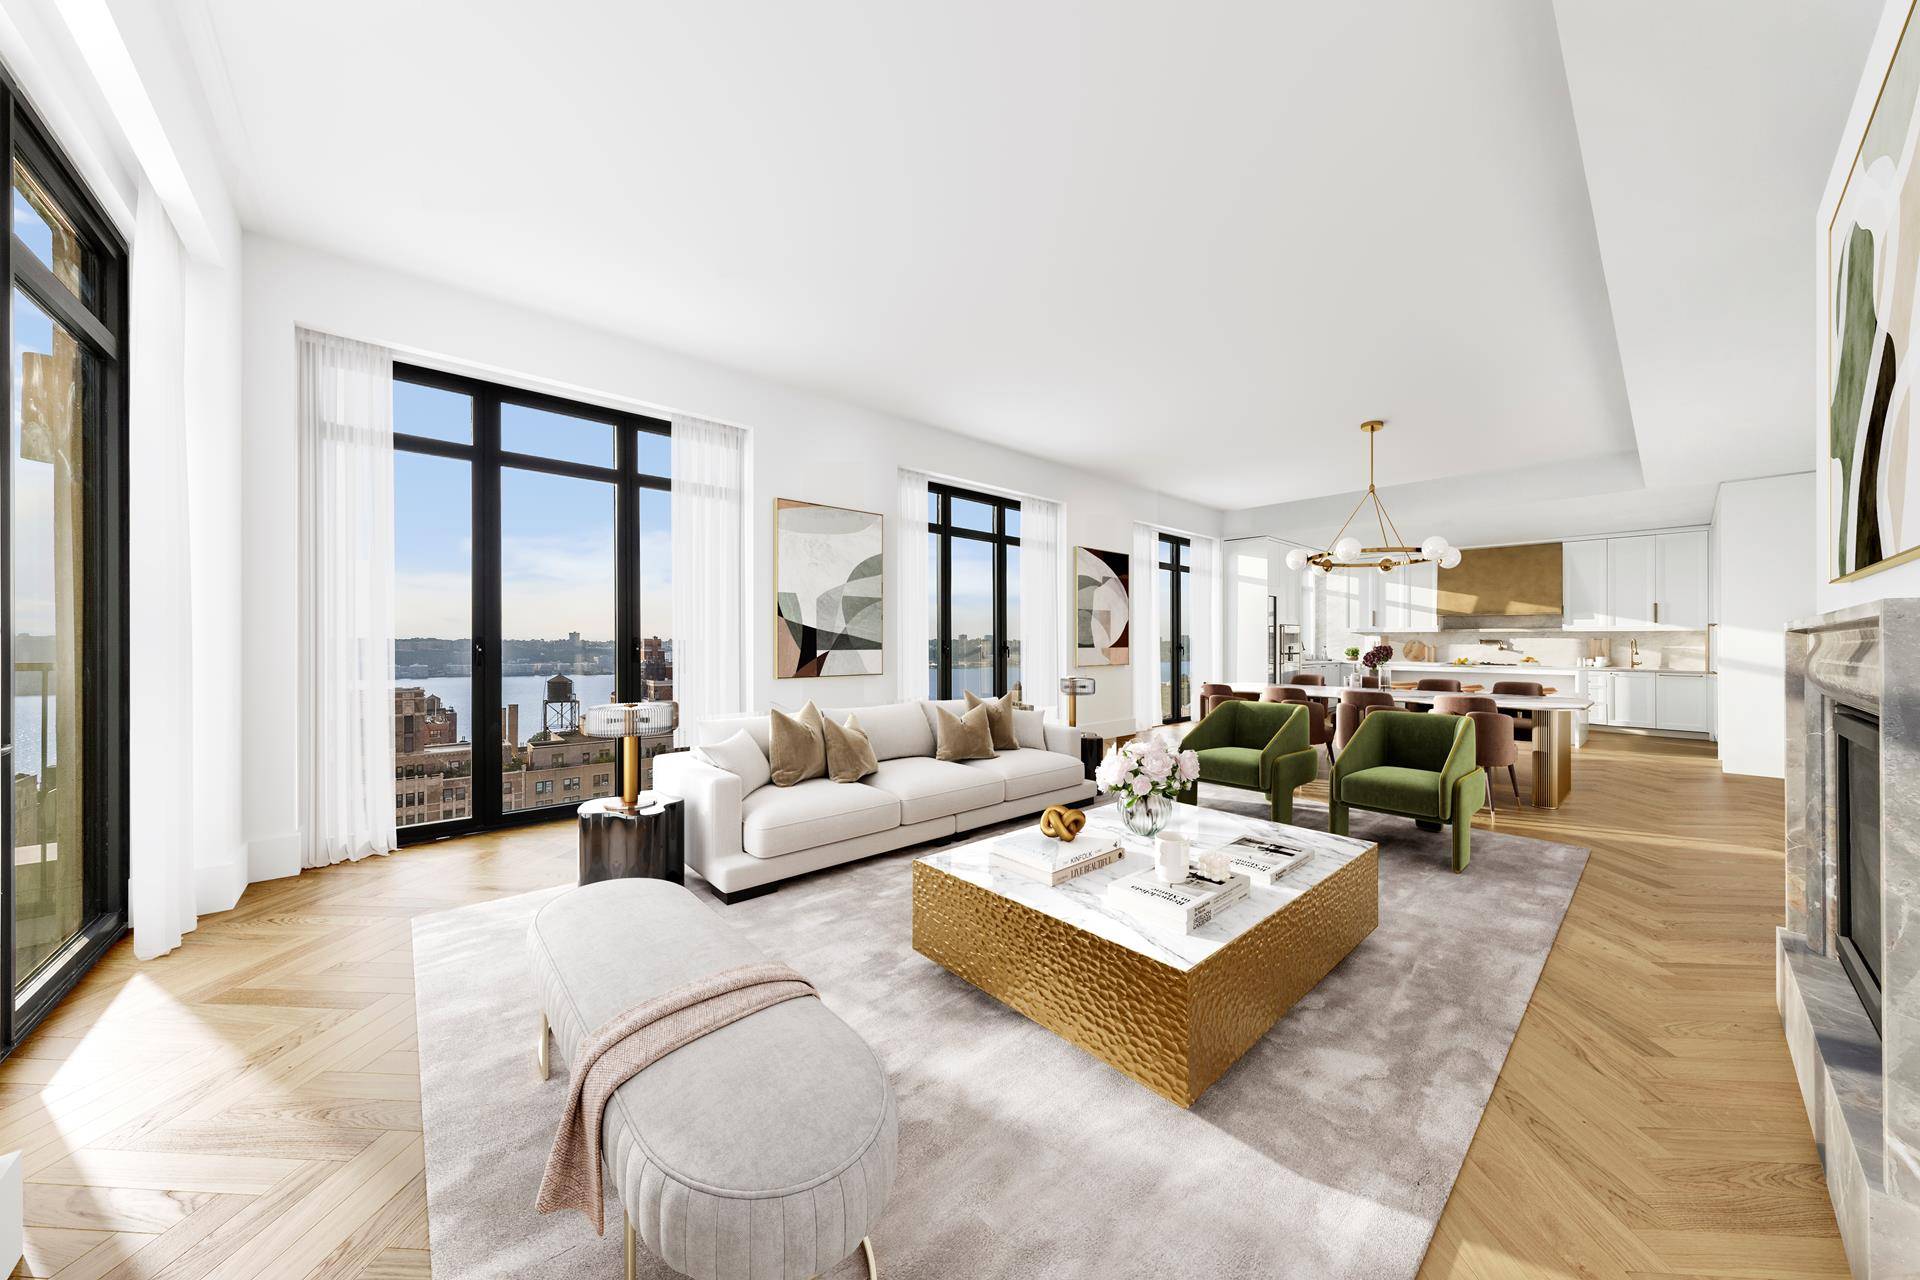 IMMEDIATE OCCUPANCYThe Penthouse, the crown jewel perched atop 2505 Broadway, encompasses the entire top floor, capped by a dramatic river facing rooftop terrace with mesmerizing views of the Hudson River, ...